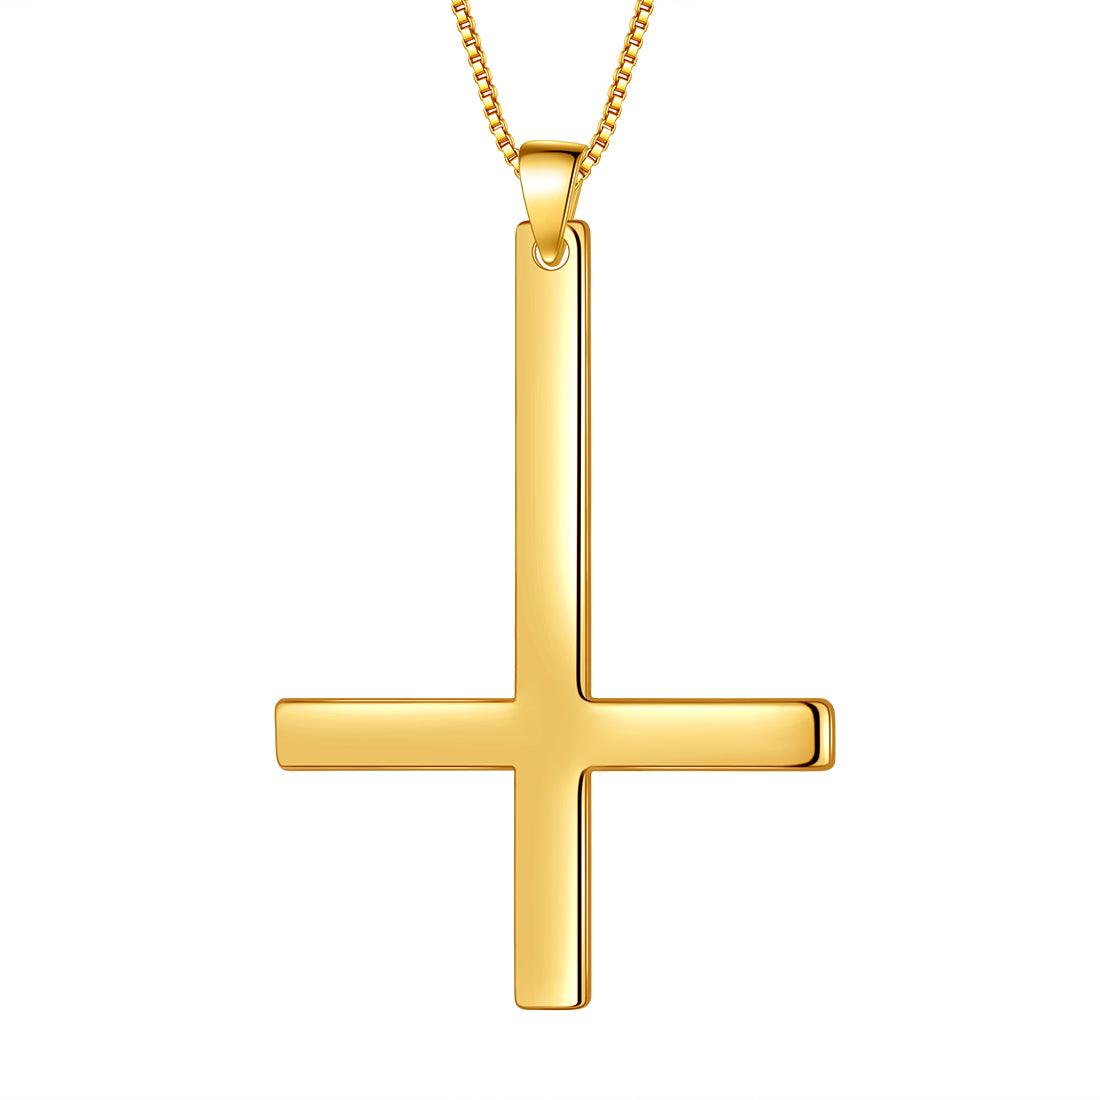 Lucky Necklace Gold Plated Star Zodiac Necklace Jewelry Zodiac Gift Men Women Girls Birthday Gifts Cute Necklaces for Teen Girls, Women's, Size: One